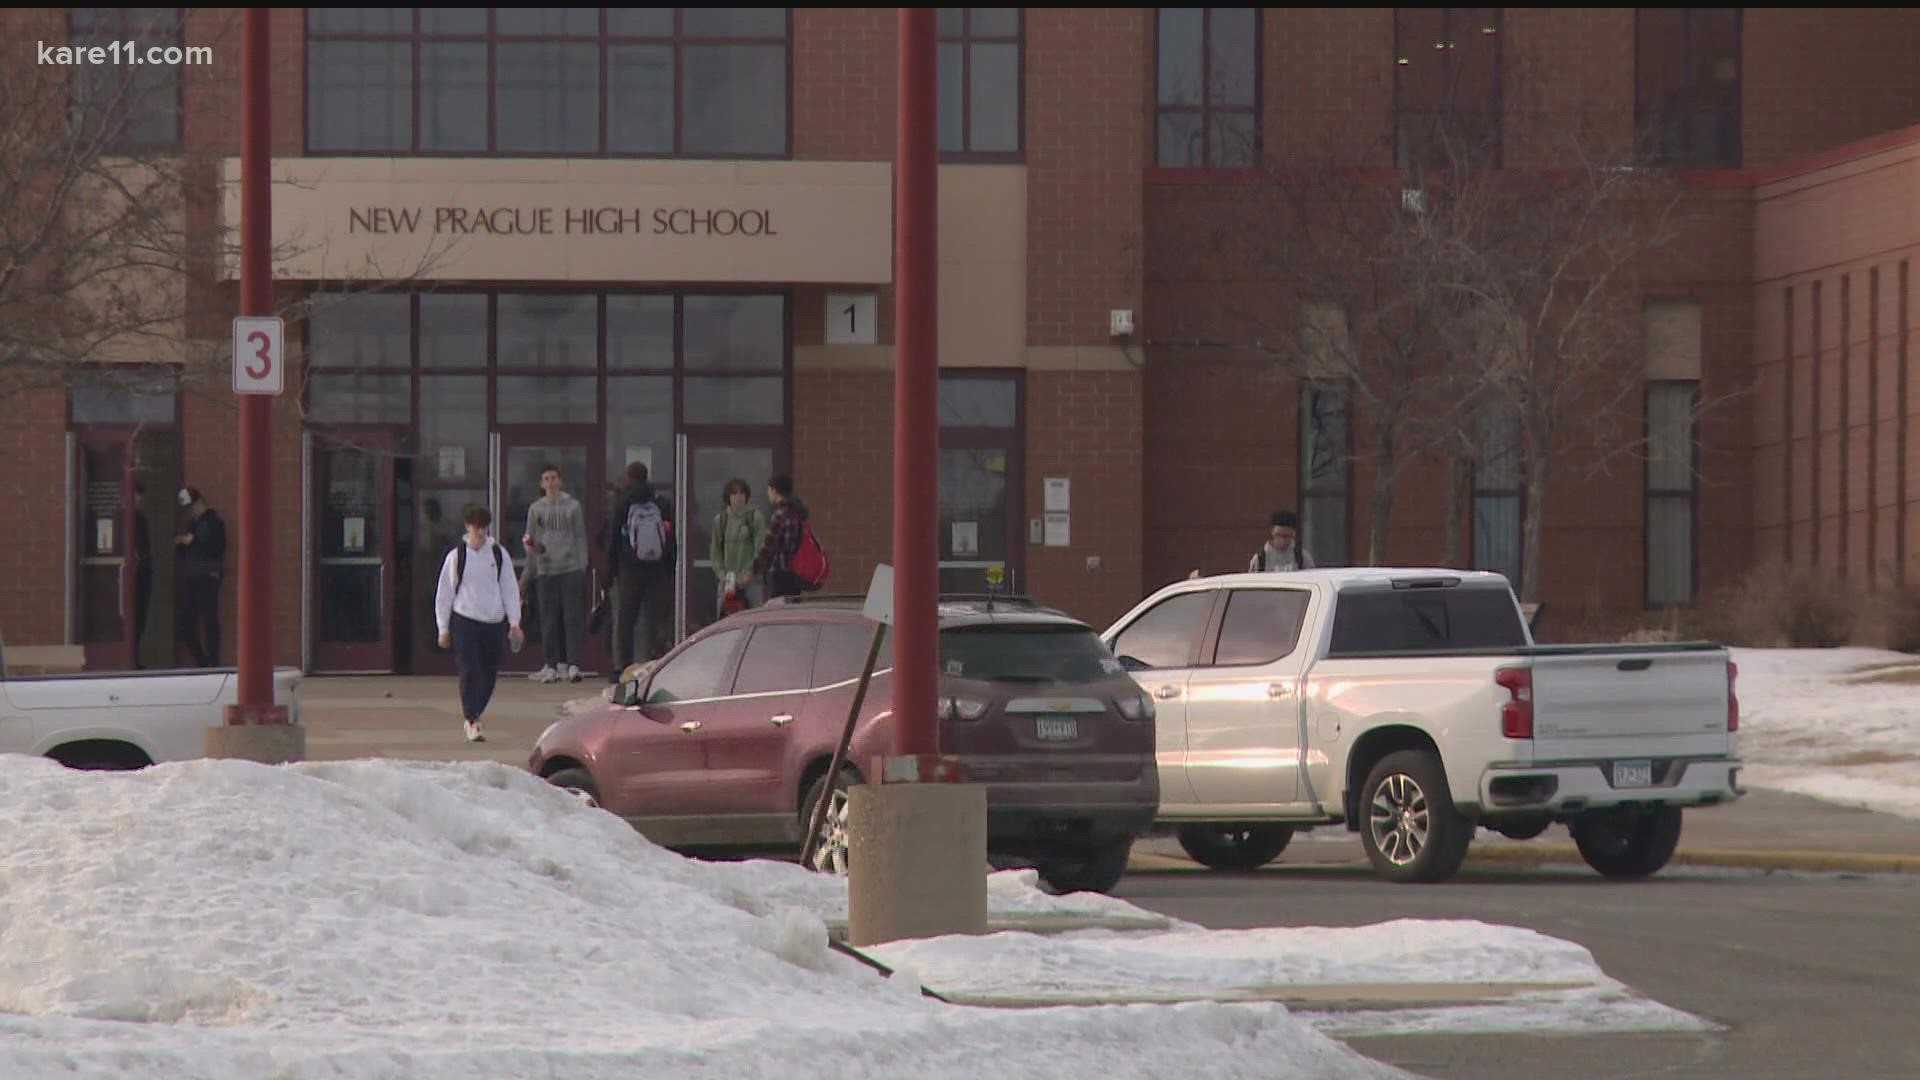 Students and members of the community are calling for action following two alleged incidents of racism at athletic events involving New Prague athletes and fans.